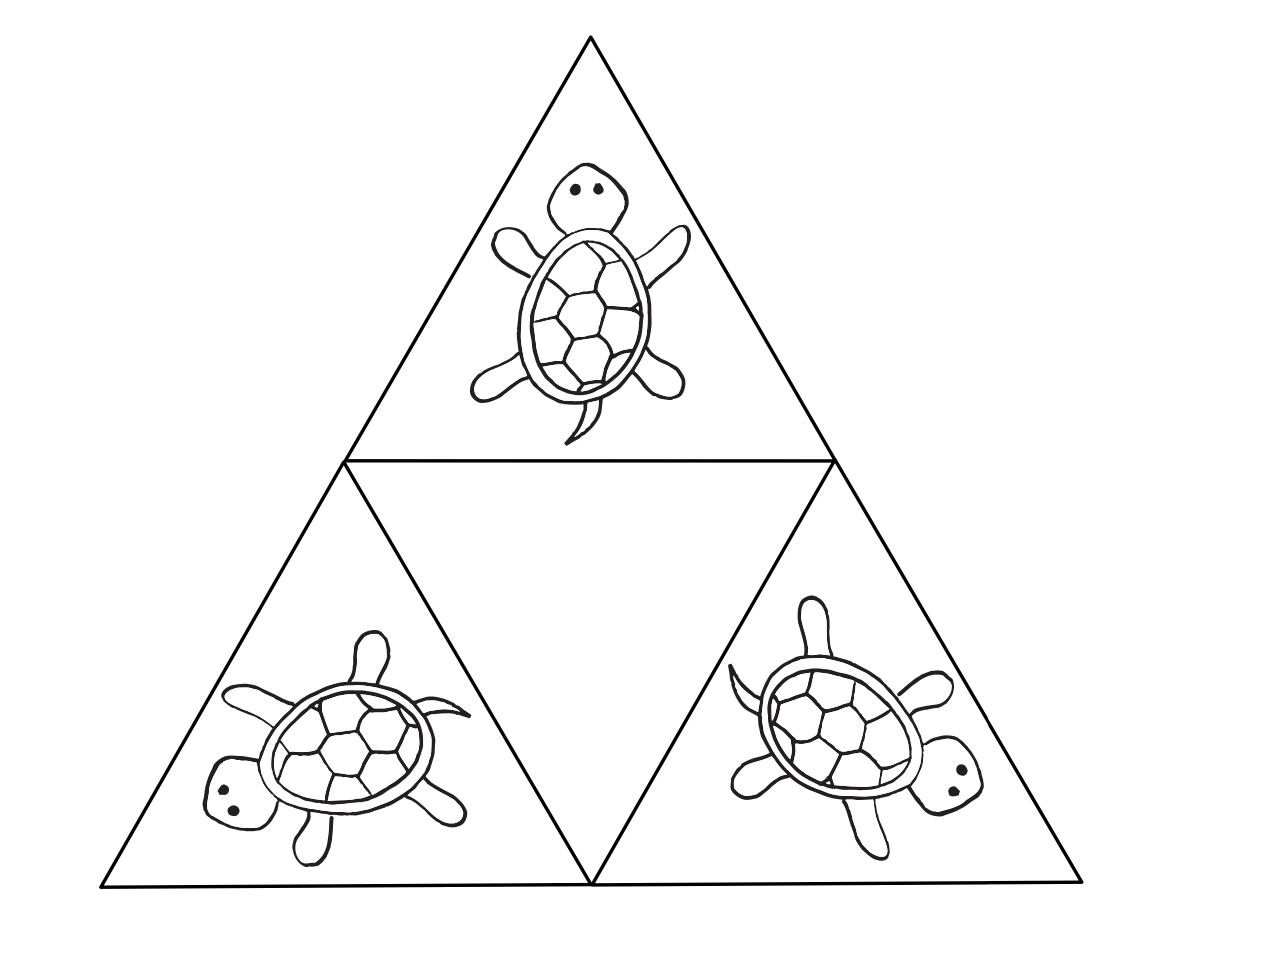 4 triangles make up a single triangle with a blank triangle in the middle and little colorable turtles in the other corners - a turtle tetrahedron coloring page